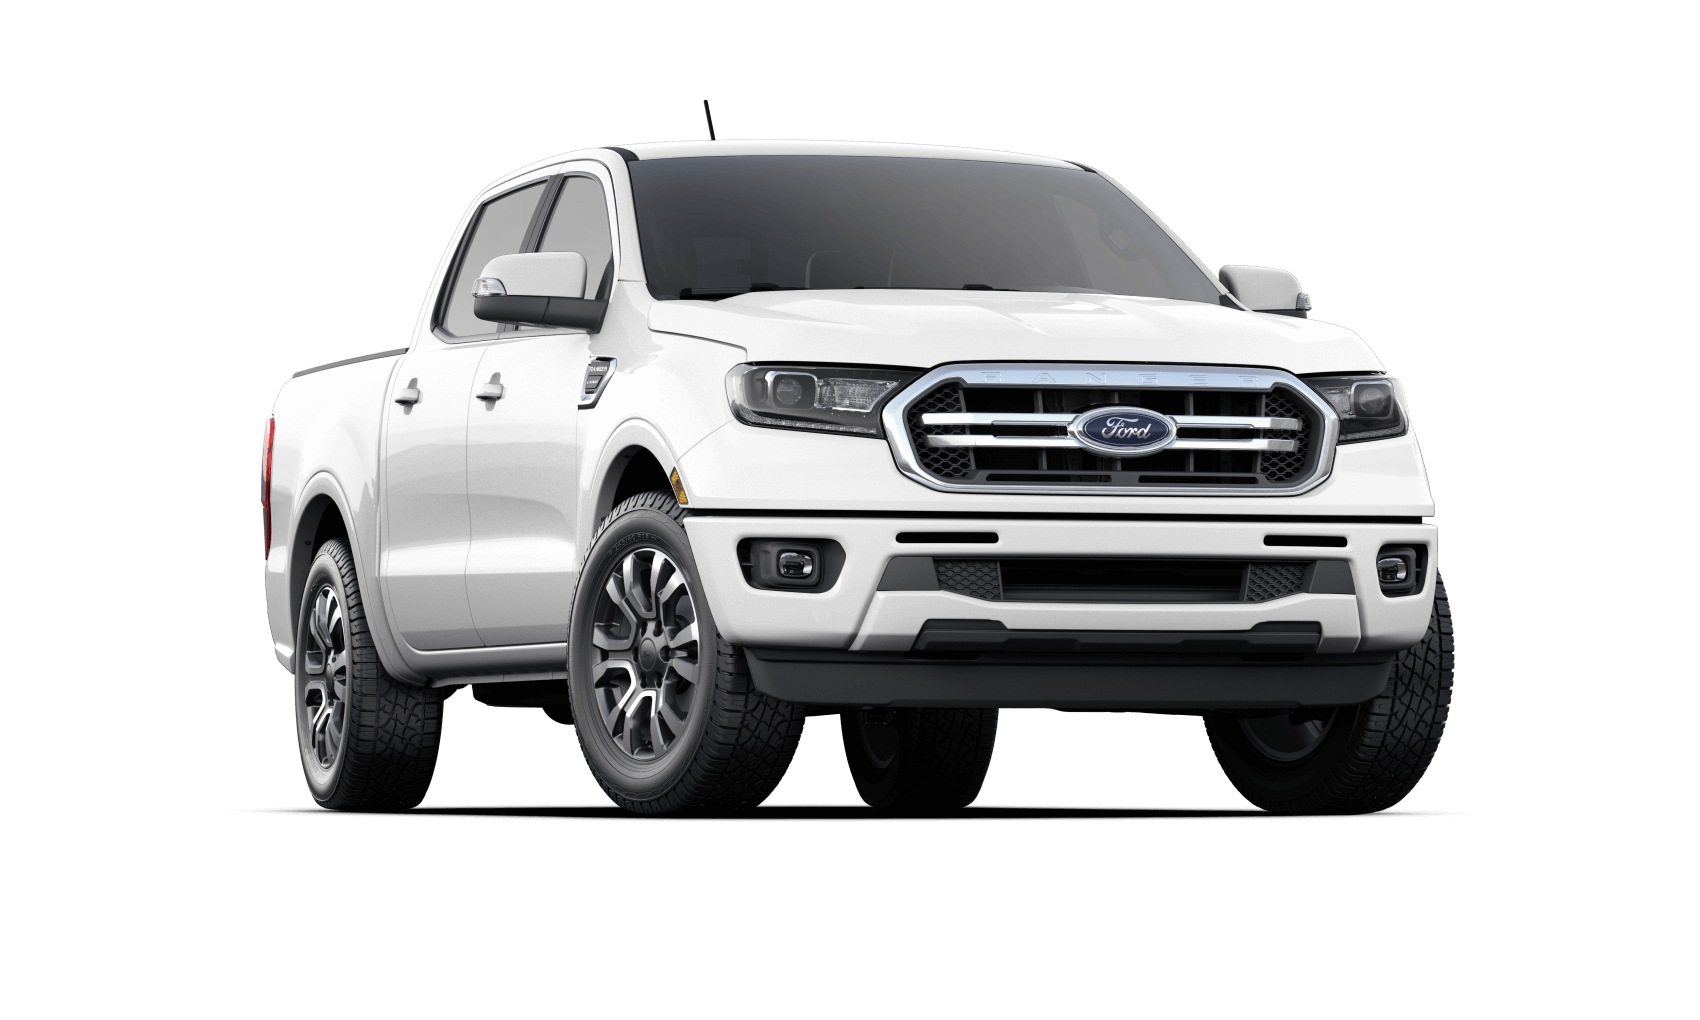 2021 Ford Ranger Performance Features